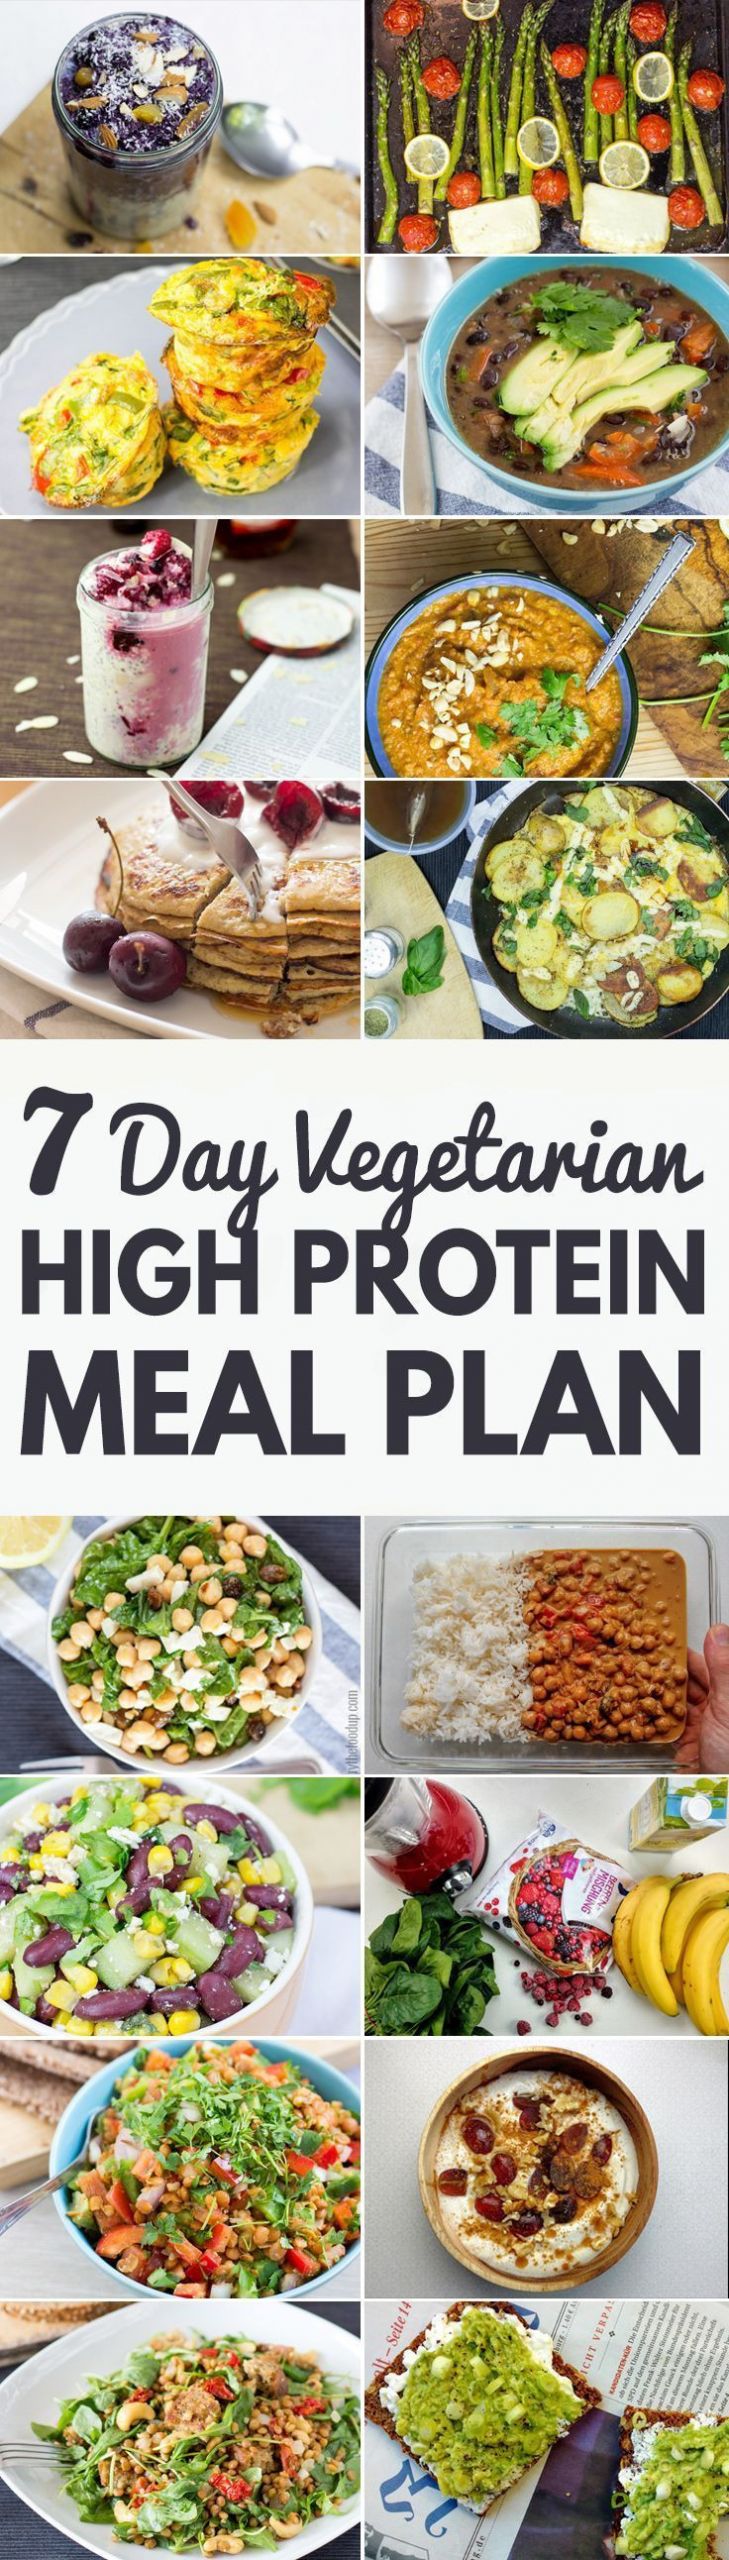 High Protein Vegan Plan
 High Protein Ve arian Meal Plan Build Muscle and Tone